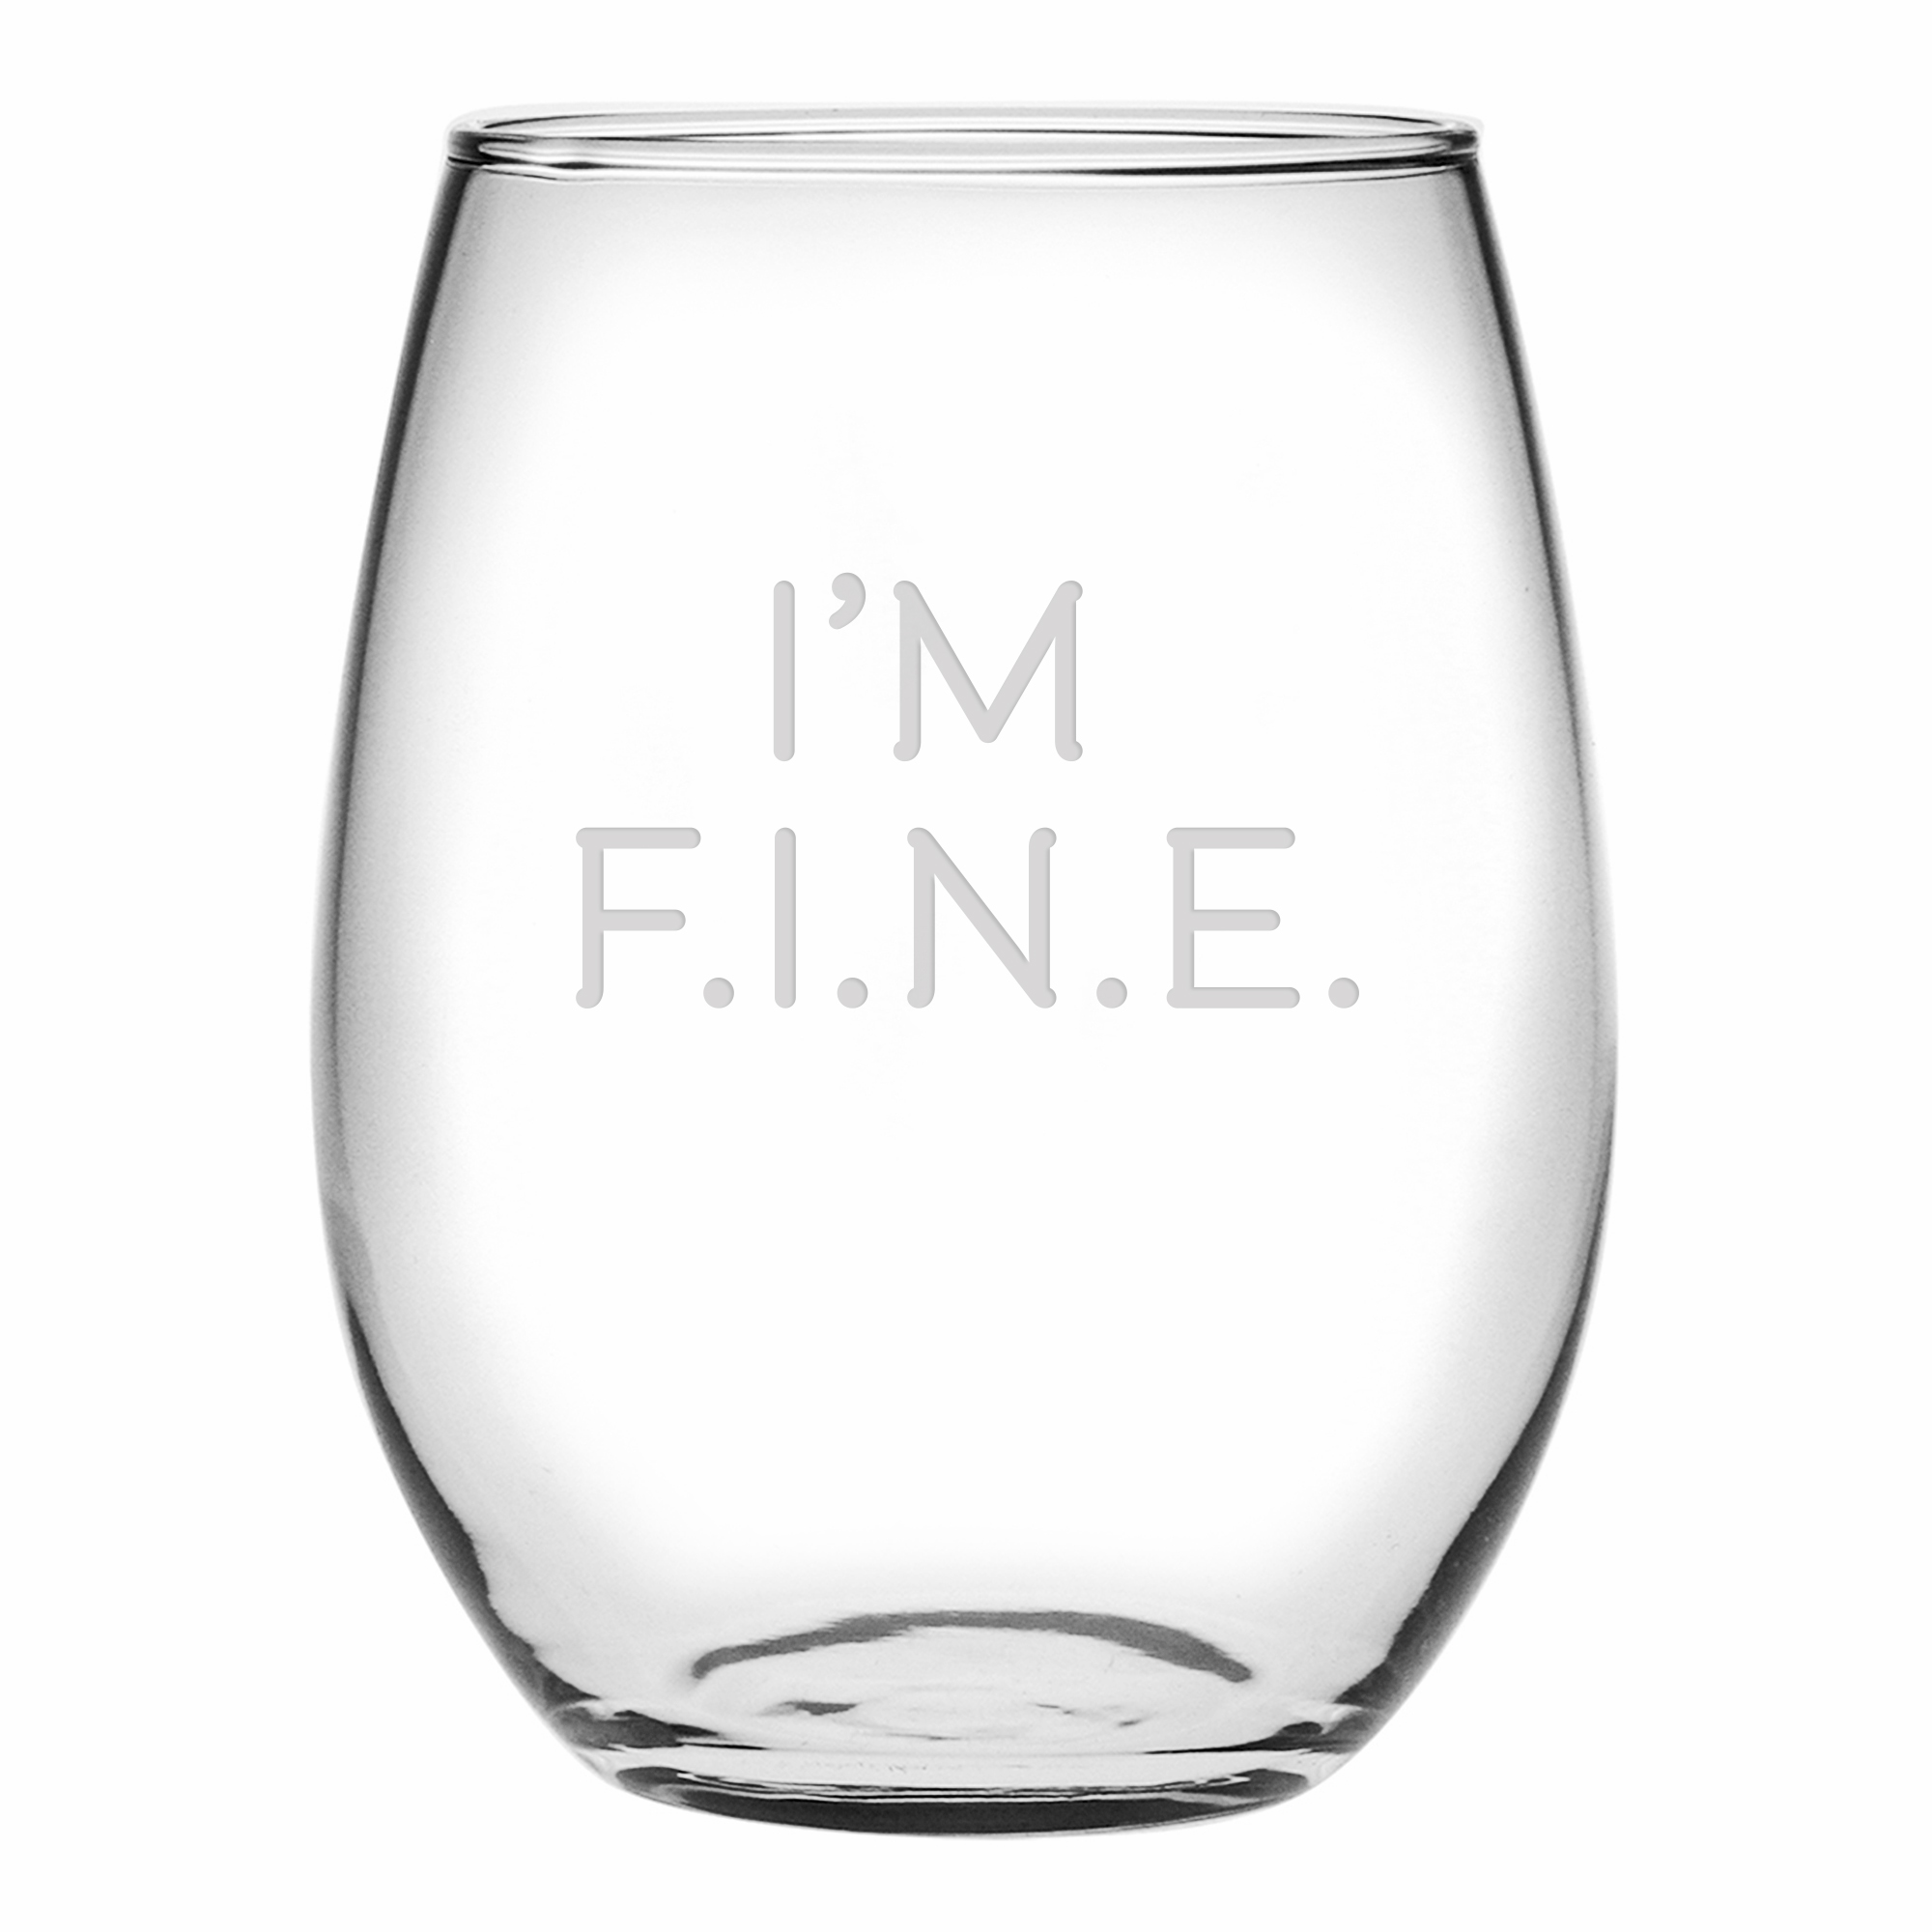 I Am Not A Wine Glass